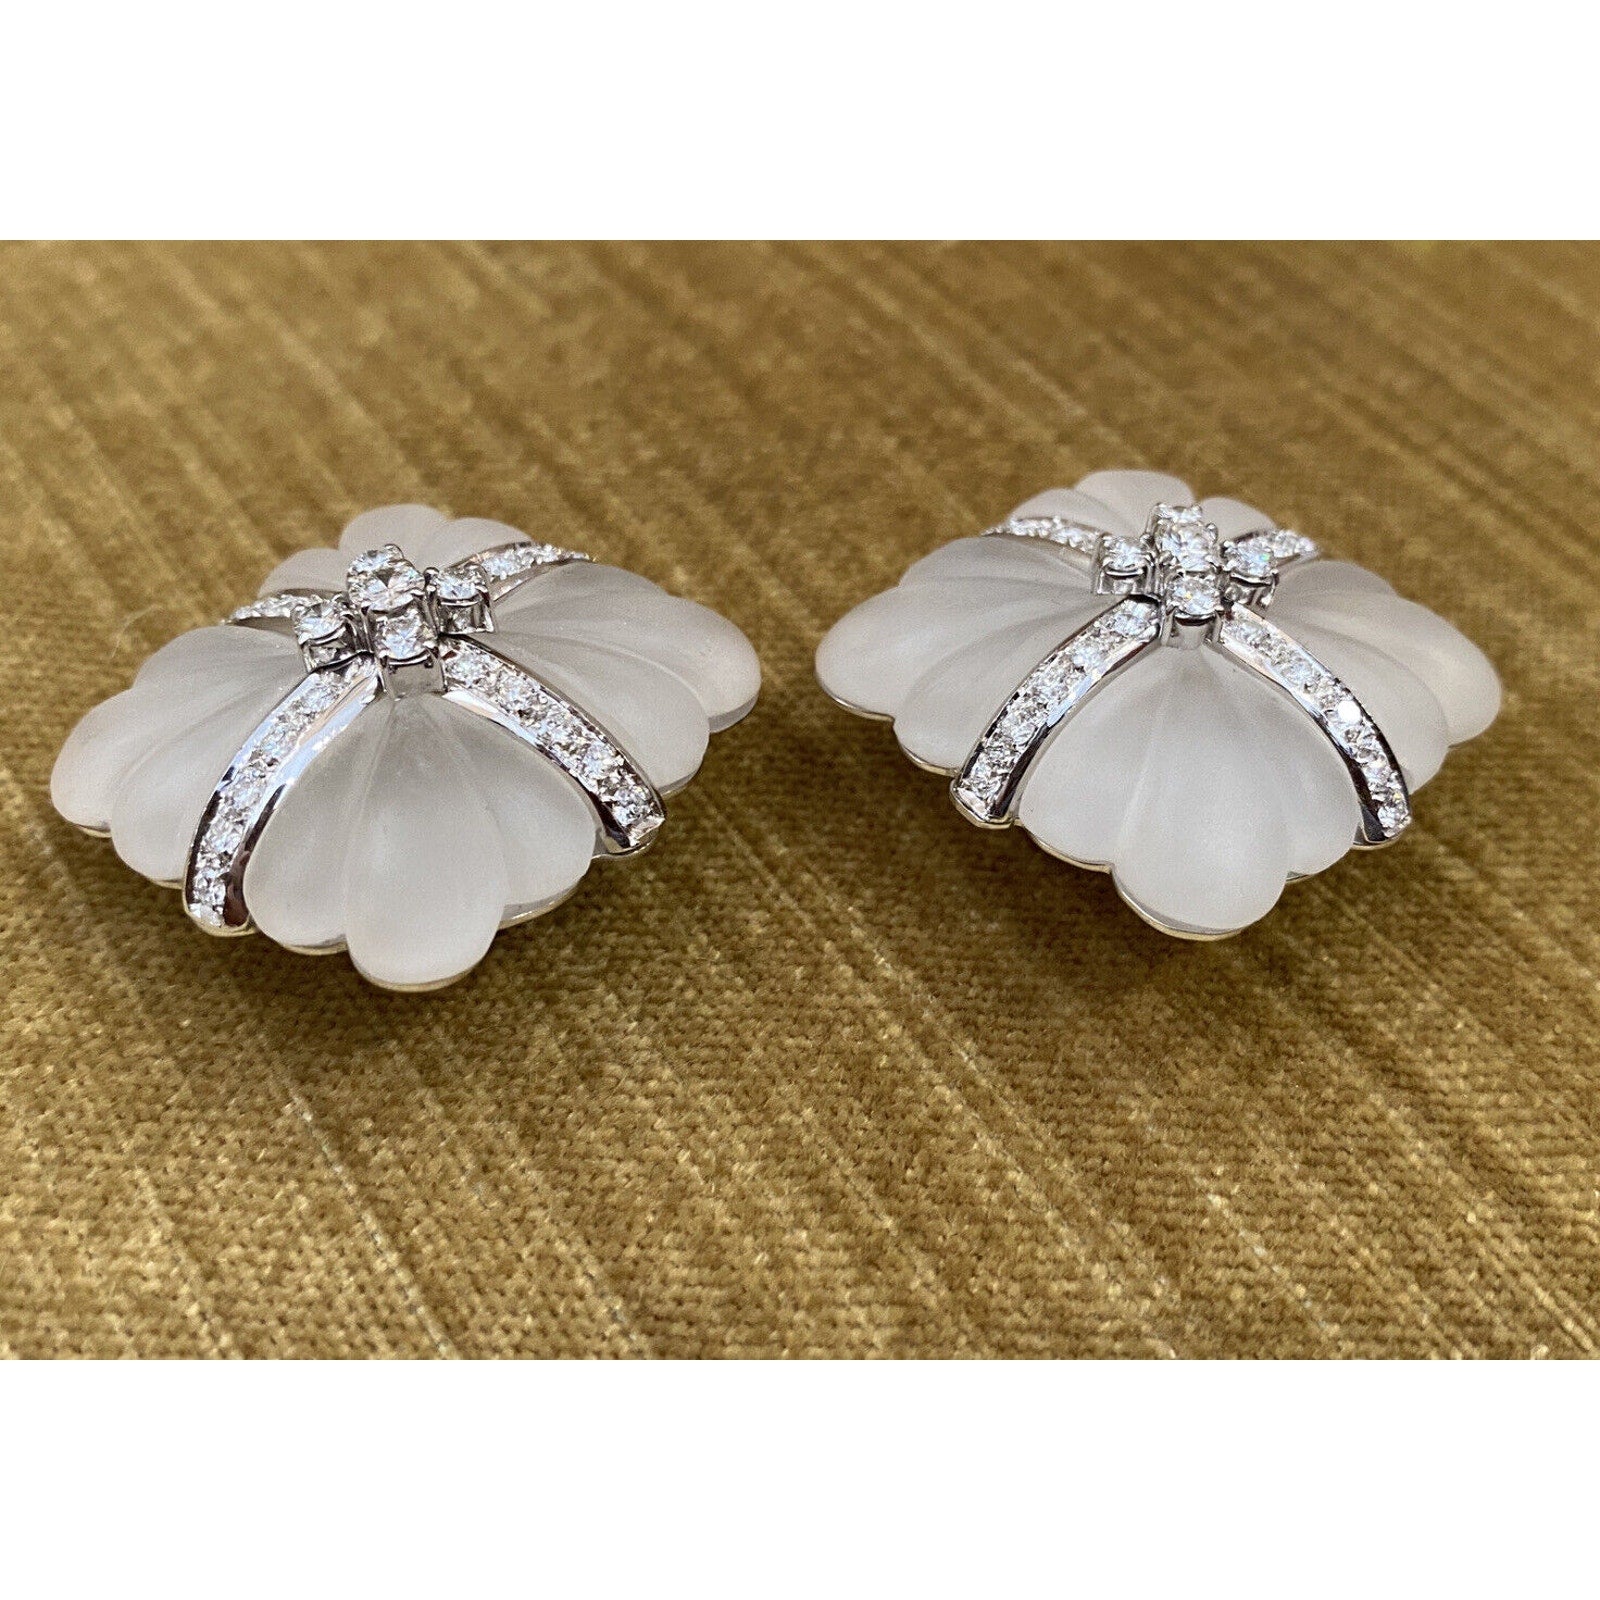 Large Carved Rock Crystal & Diamond Button Earrings in 18k White Gold- HM2401AA